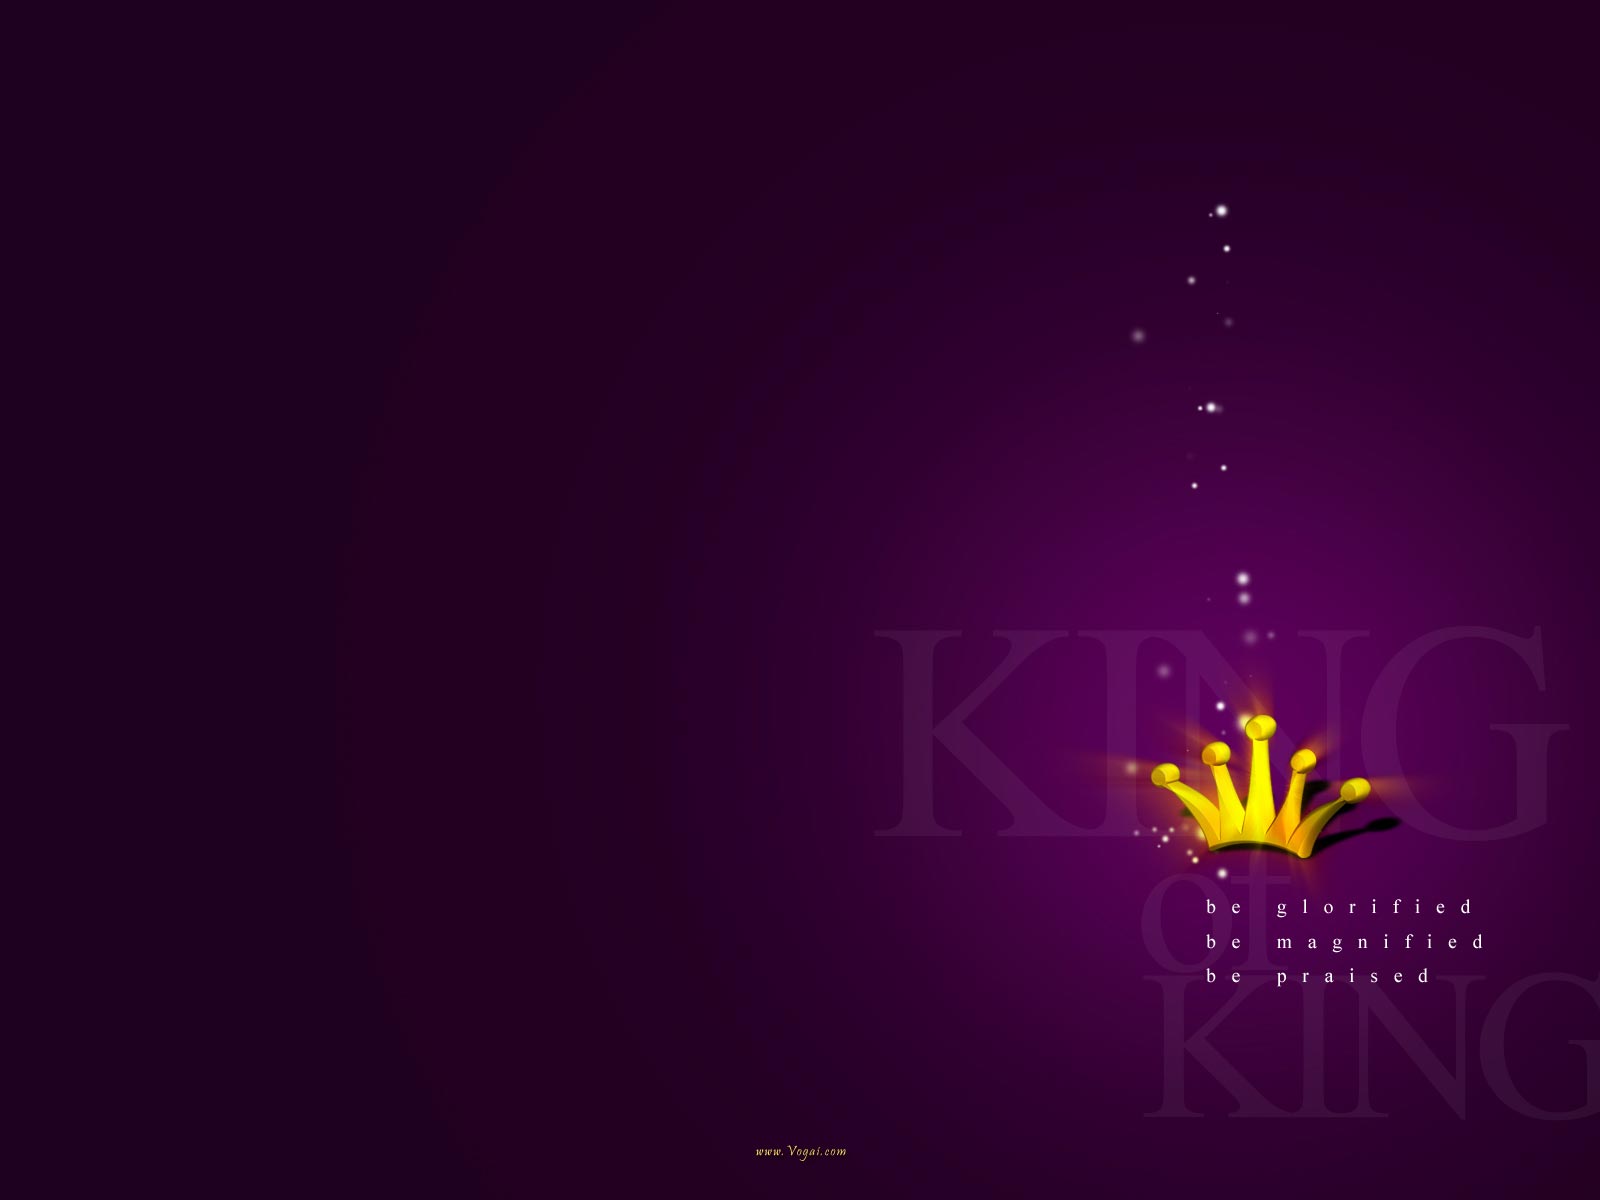  King of Kings Violet Background Wallpaper Christian Wallpapers and